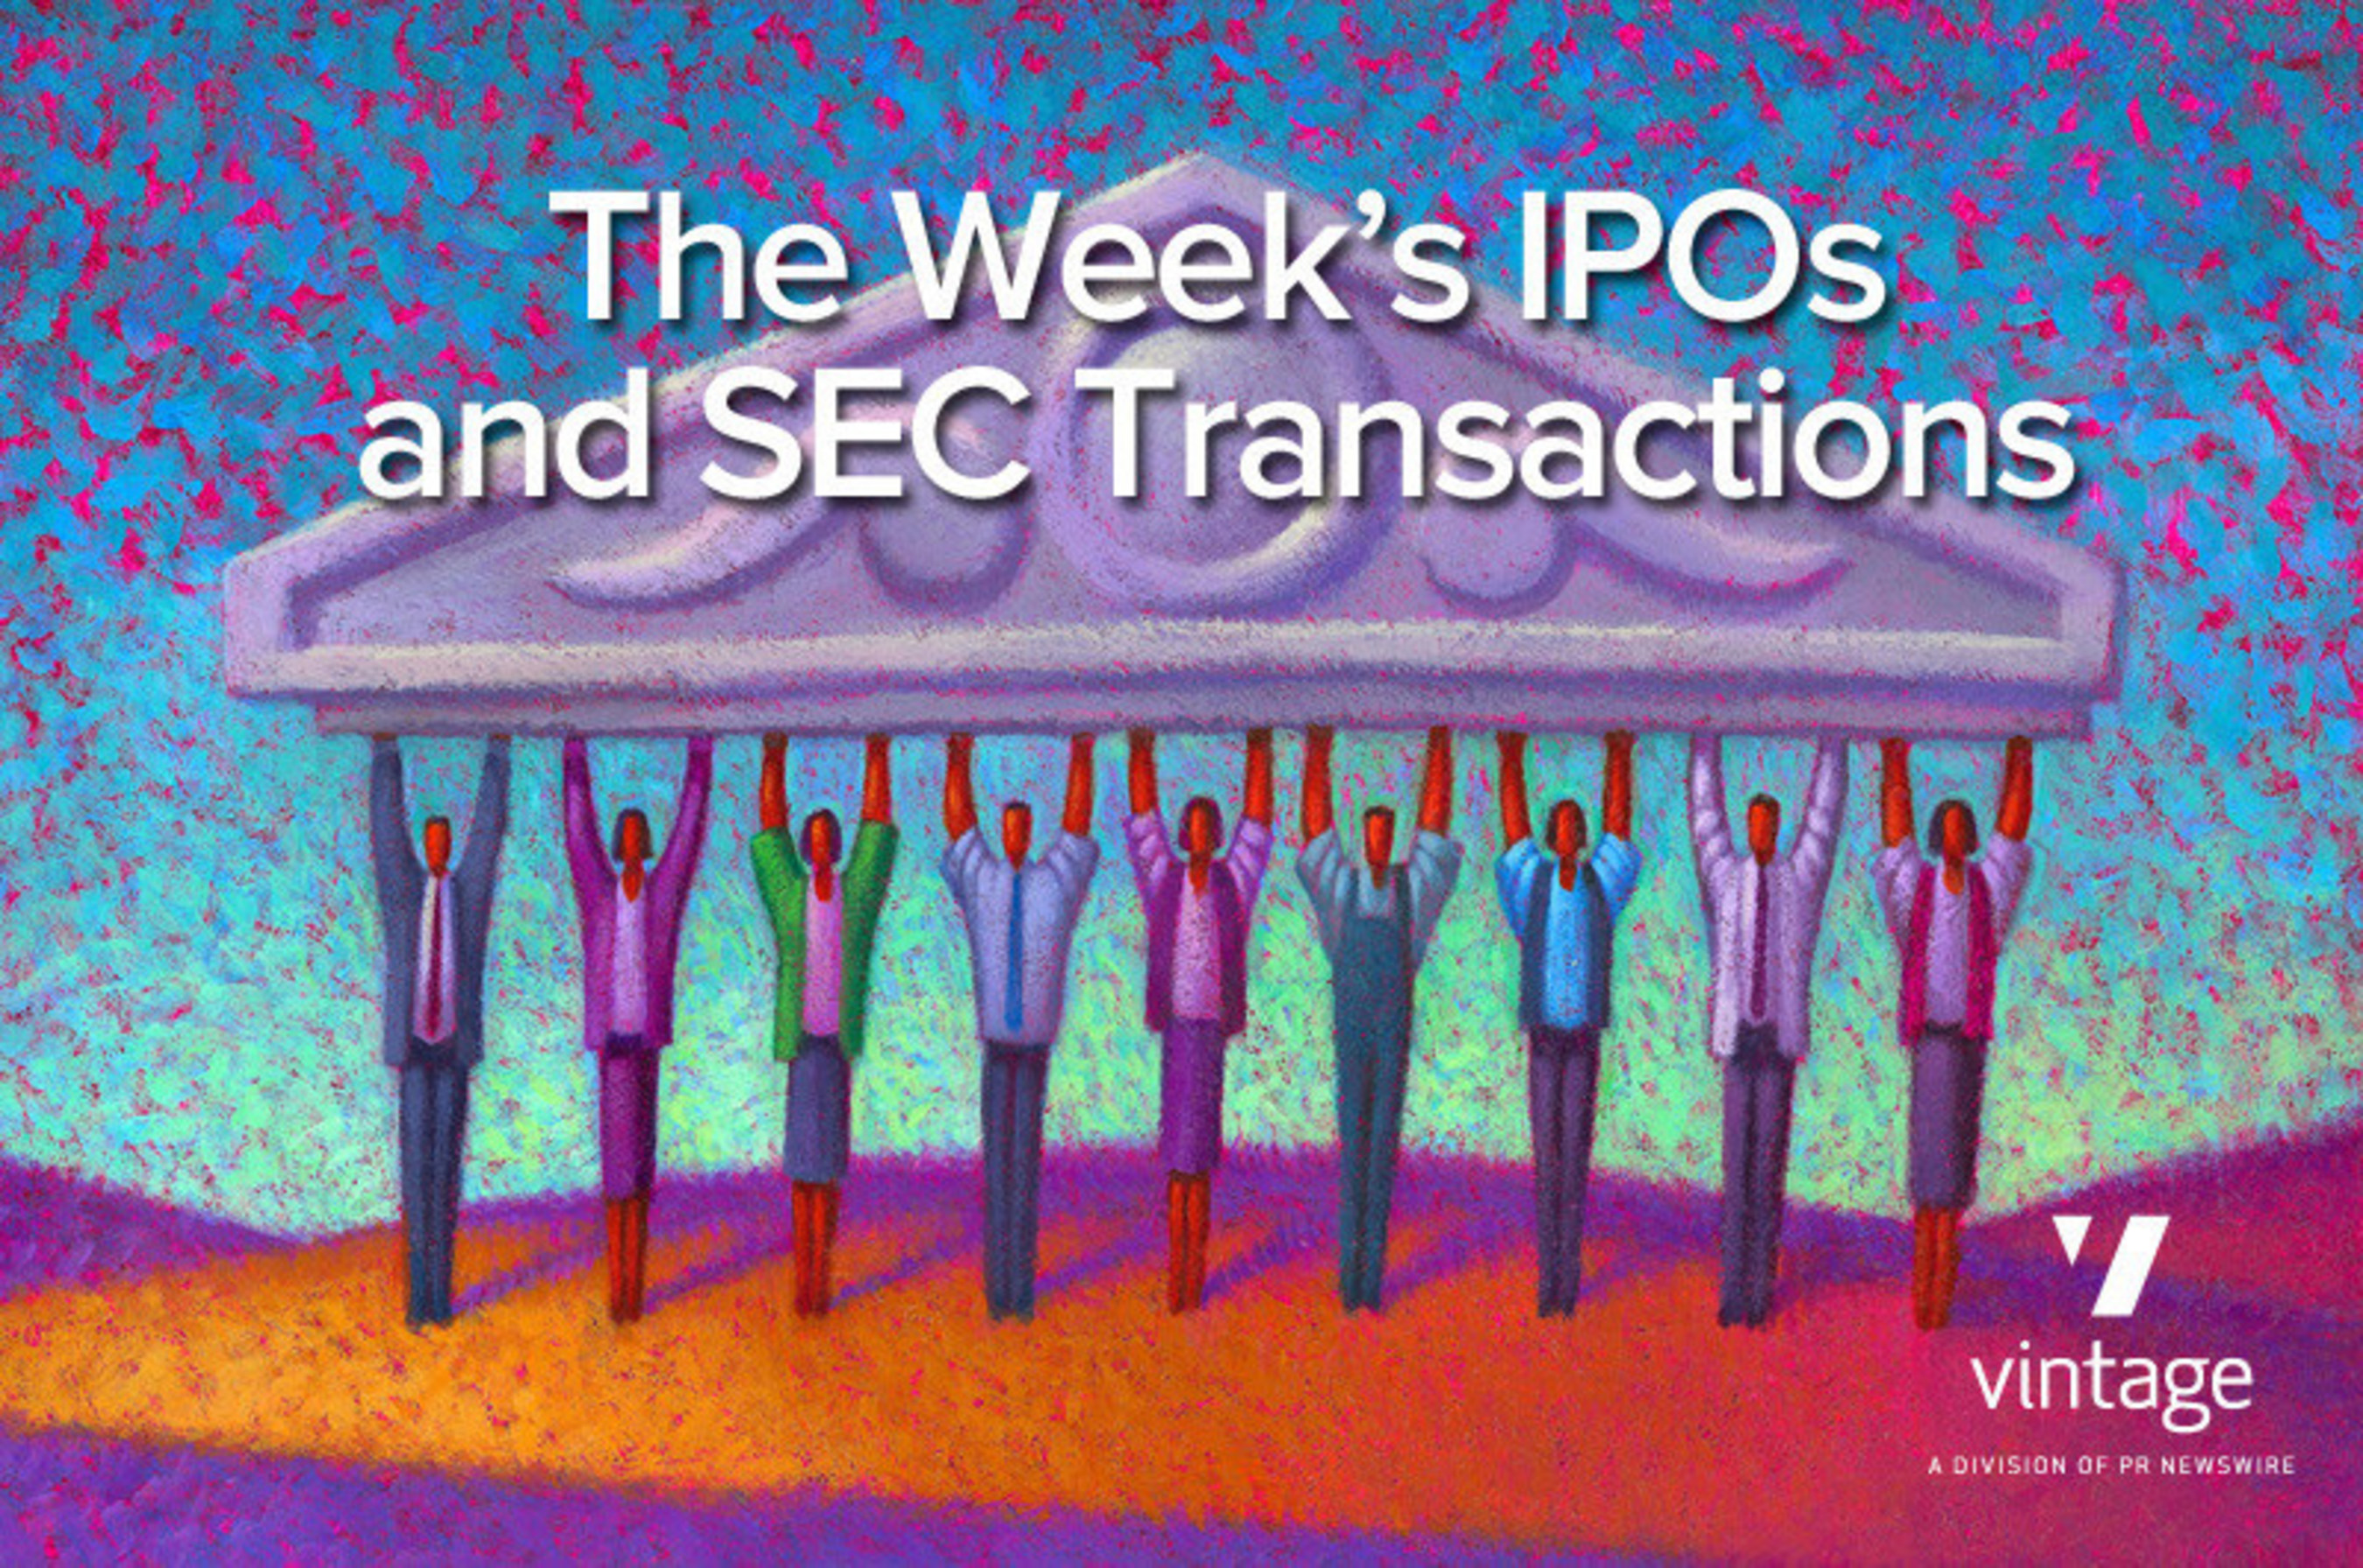 Stay updated on the week's IPOs and Transactions on the Building Shareholder Confidence blog, http://irblog.prnewswire.com.